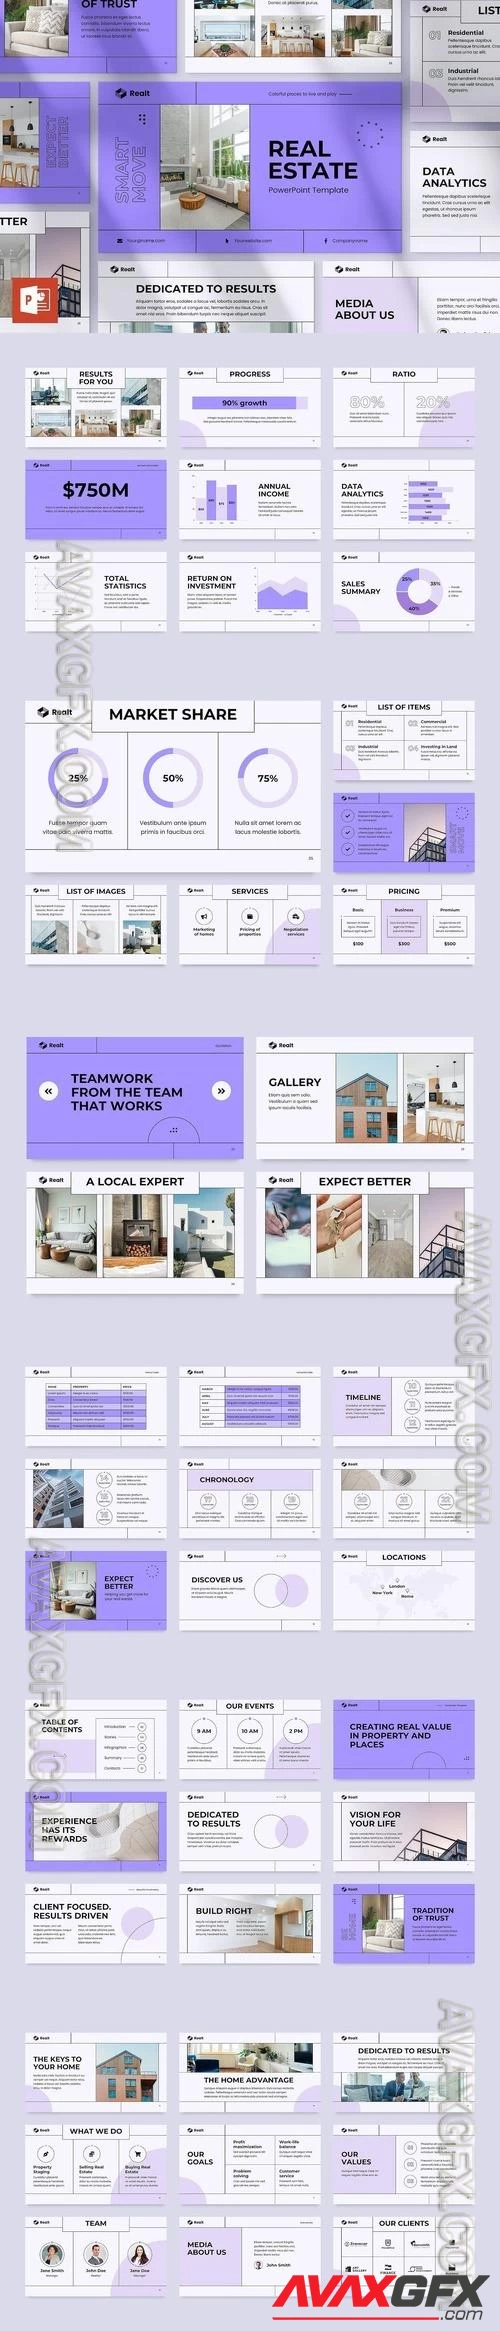 Real Estate PowerPoint Template [PPTX]